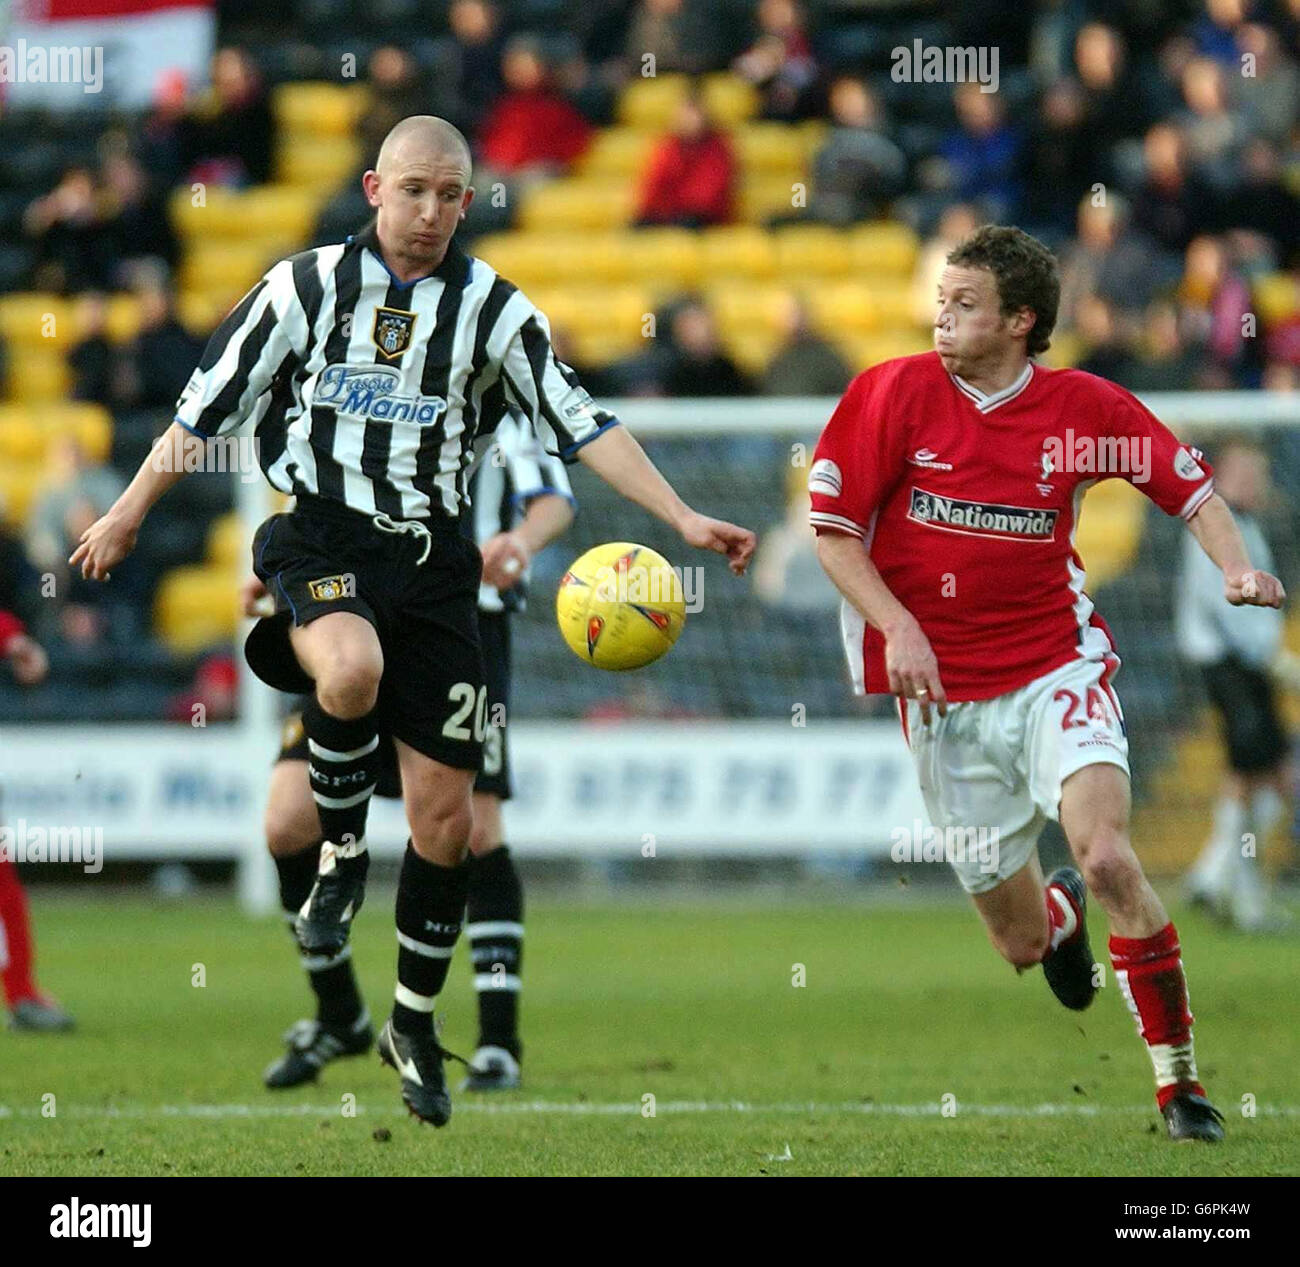 Notts County's Andrew Parkinson (left) challenges Swindon's Steve Robinson during the Nationwide Division Two match at the County Ground, Nottingham. NO UNOFFICIAL CLUB WEBSITE USE. Stock Photo